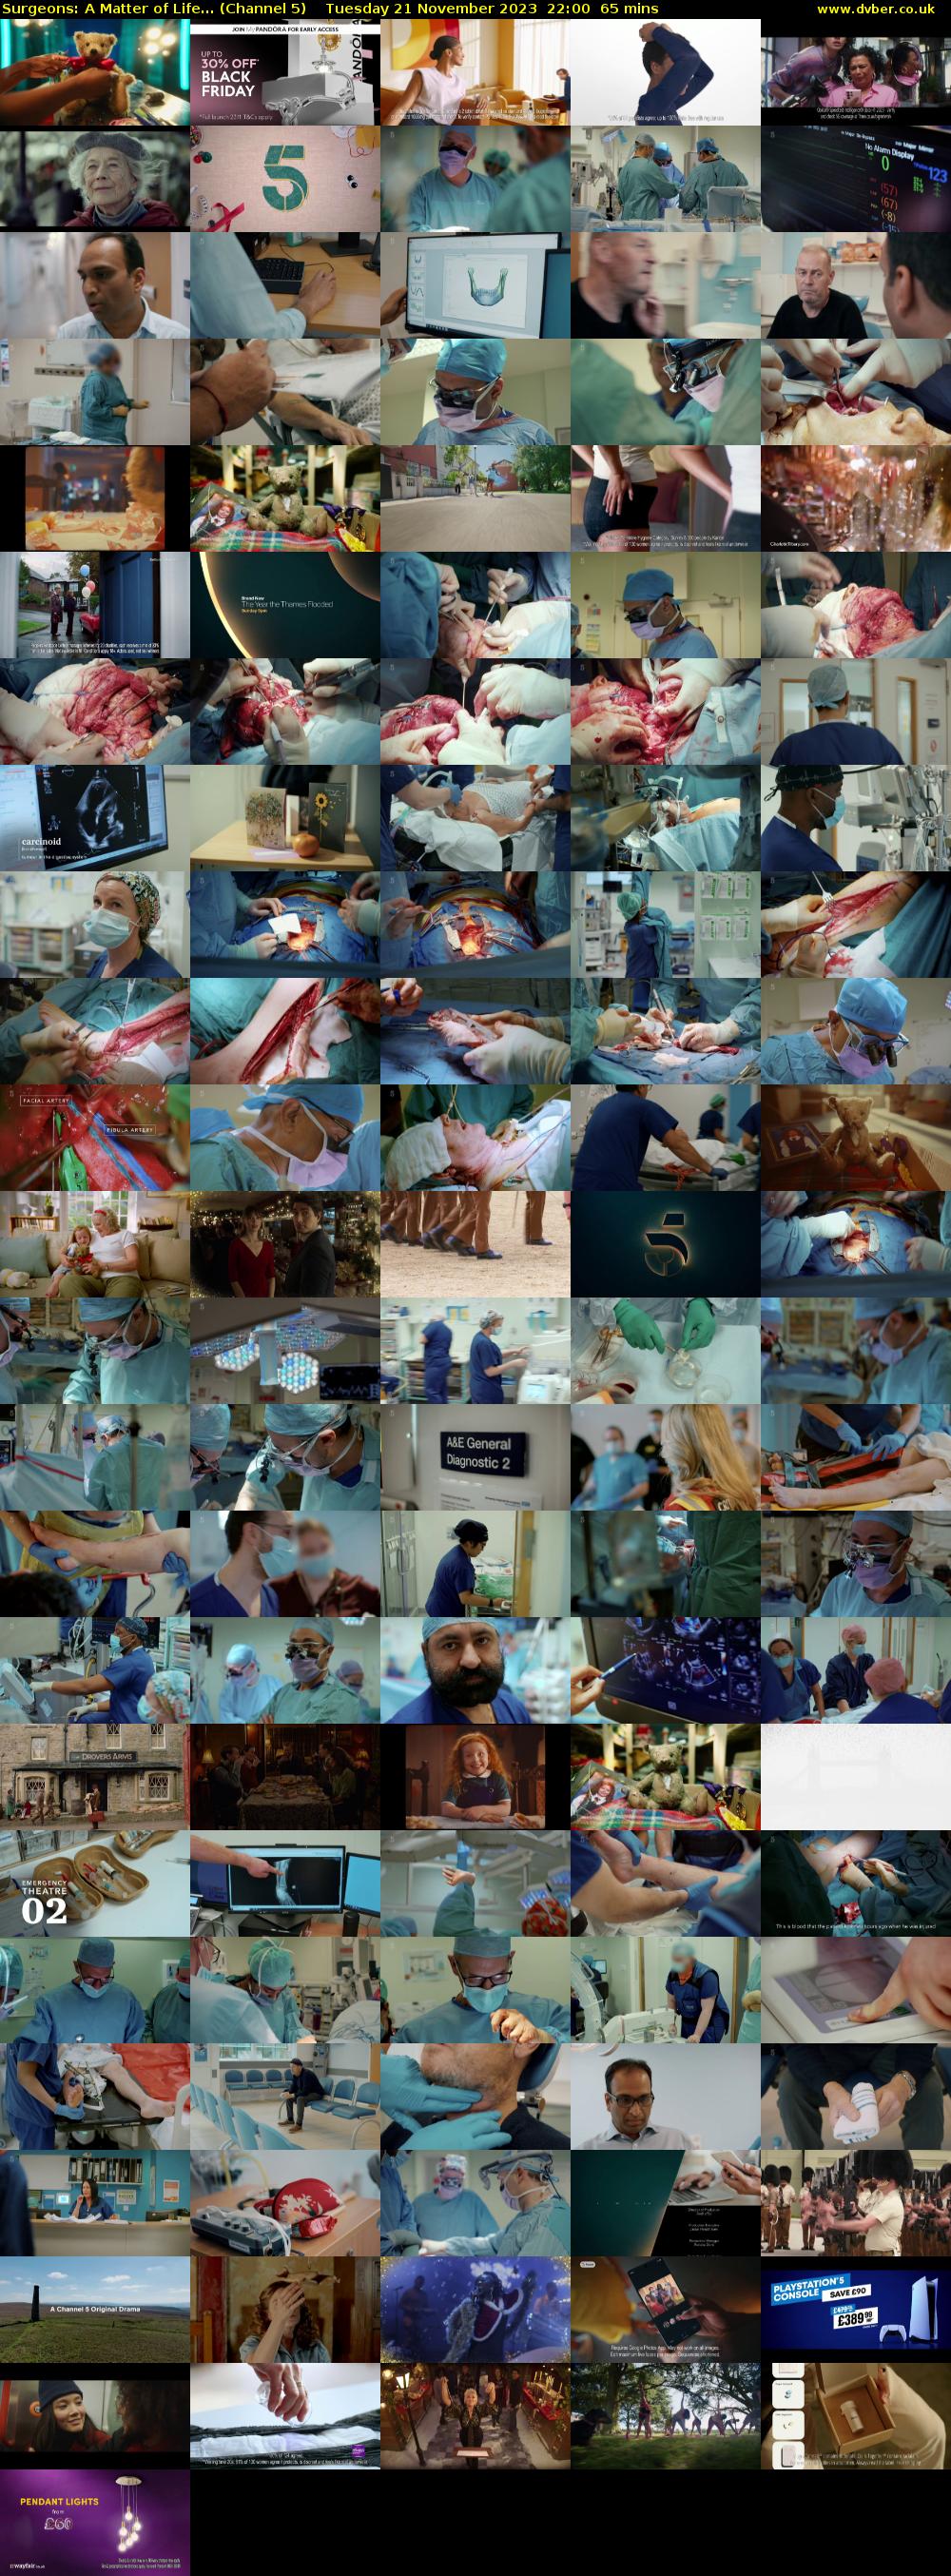 Surgeons: A Matter of Life... (Channel 5) Tuesday 21 November 2023 22:00 - 23:05